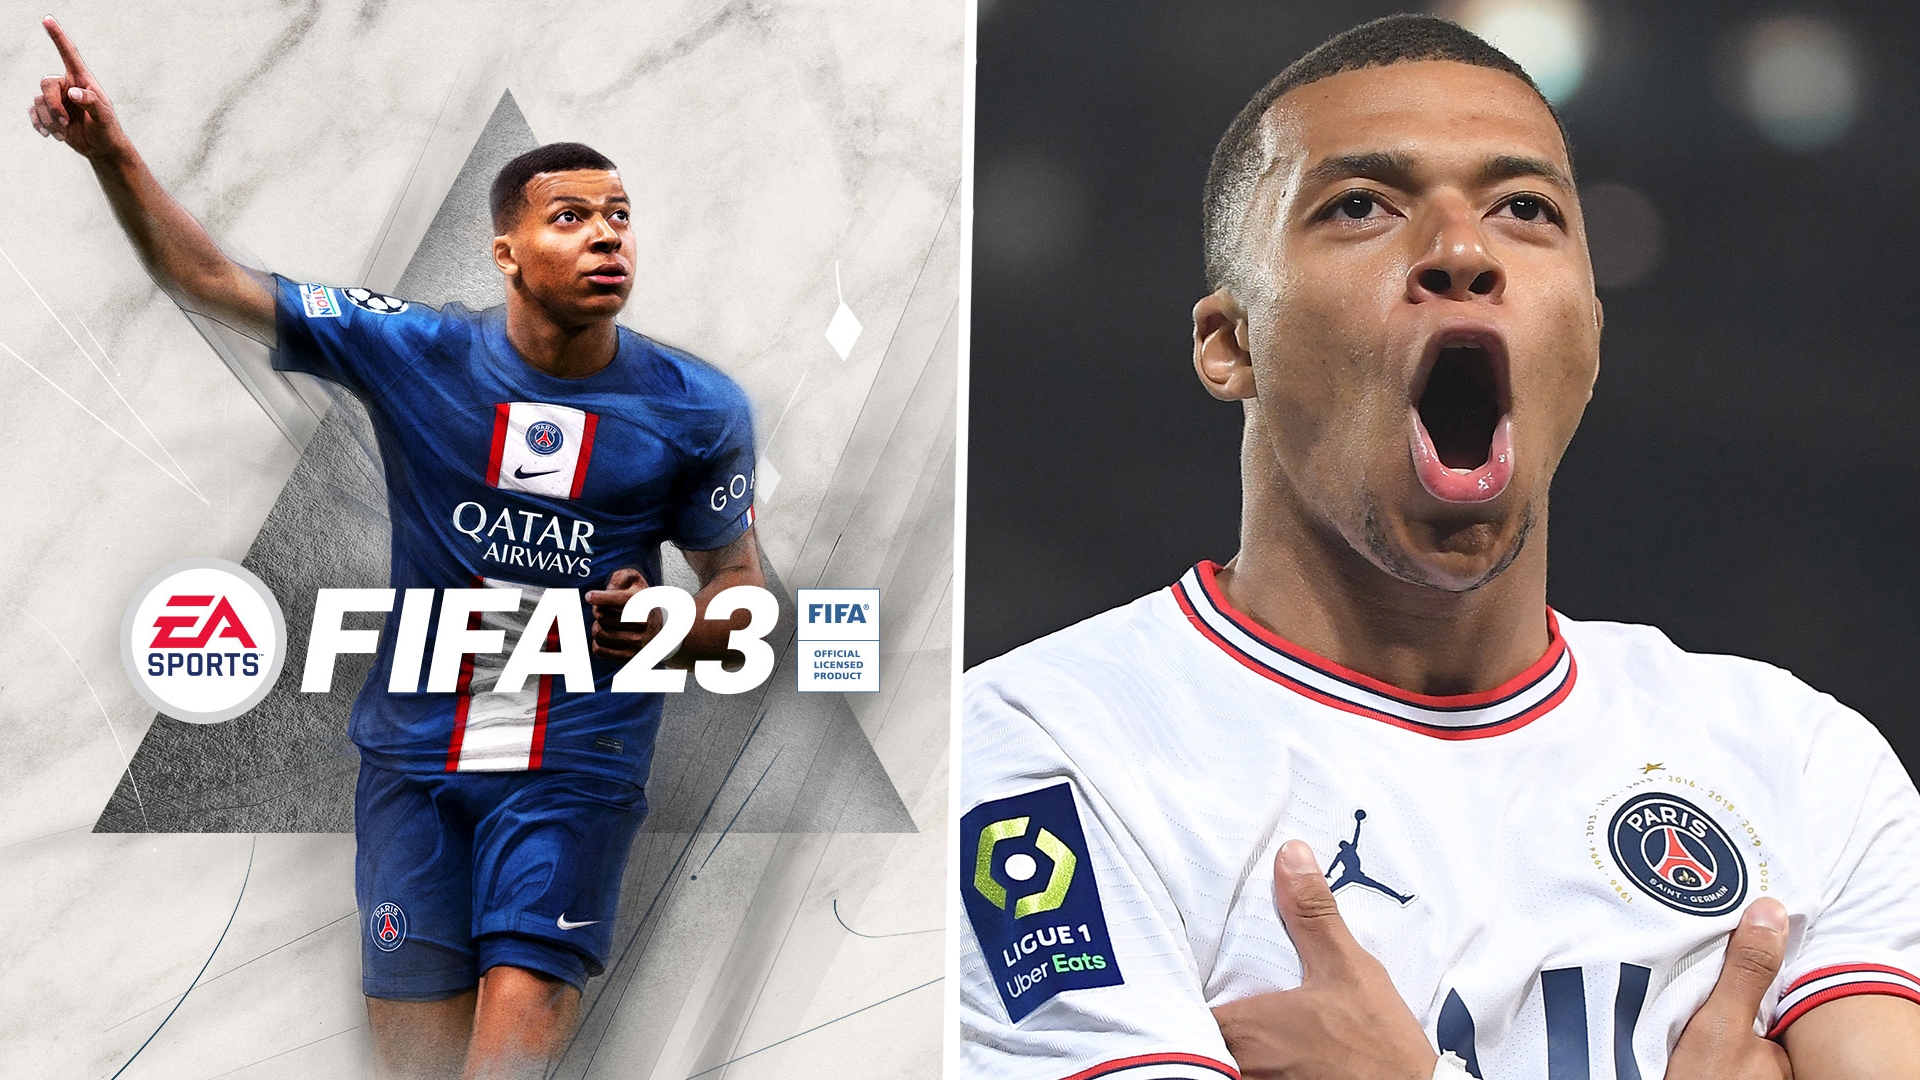 FIFA 23 cover star revealed: PSG star Mbappe the face of EA Sports' new game for third successive year. Goal.com US